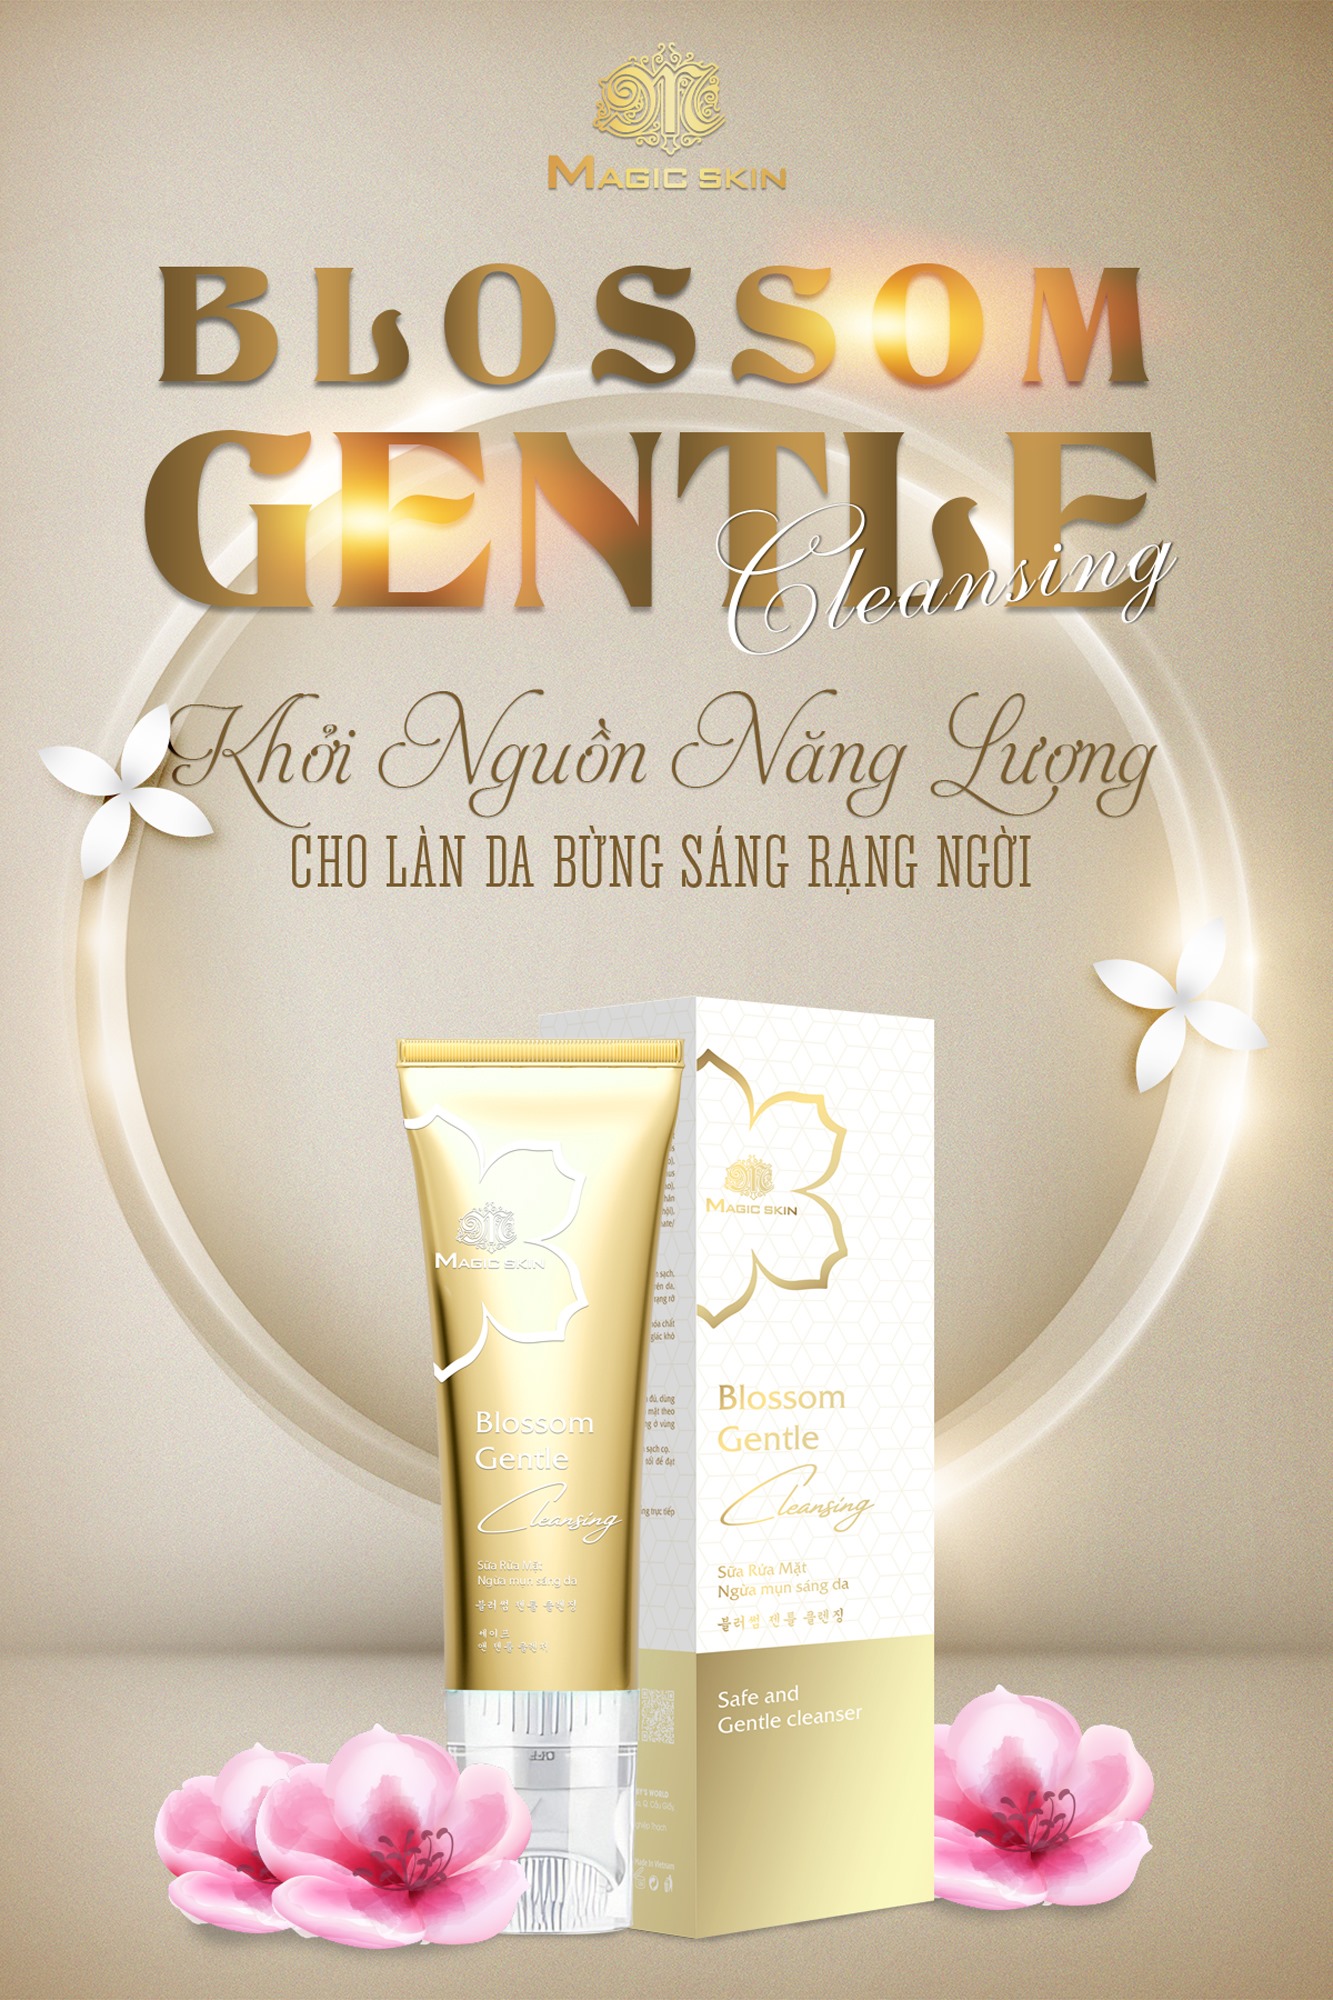 Blossom Gentle Cleansing